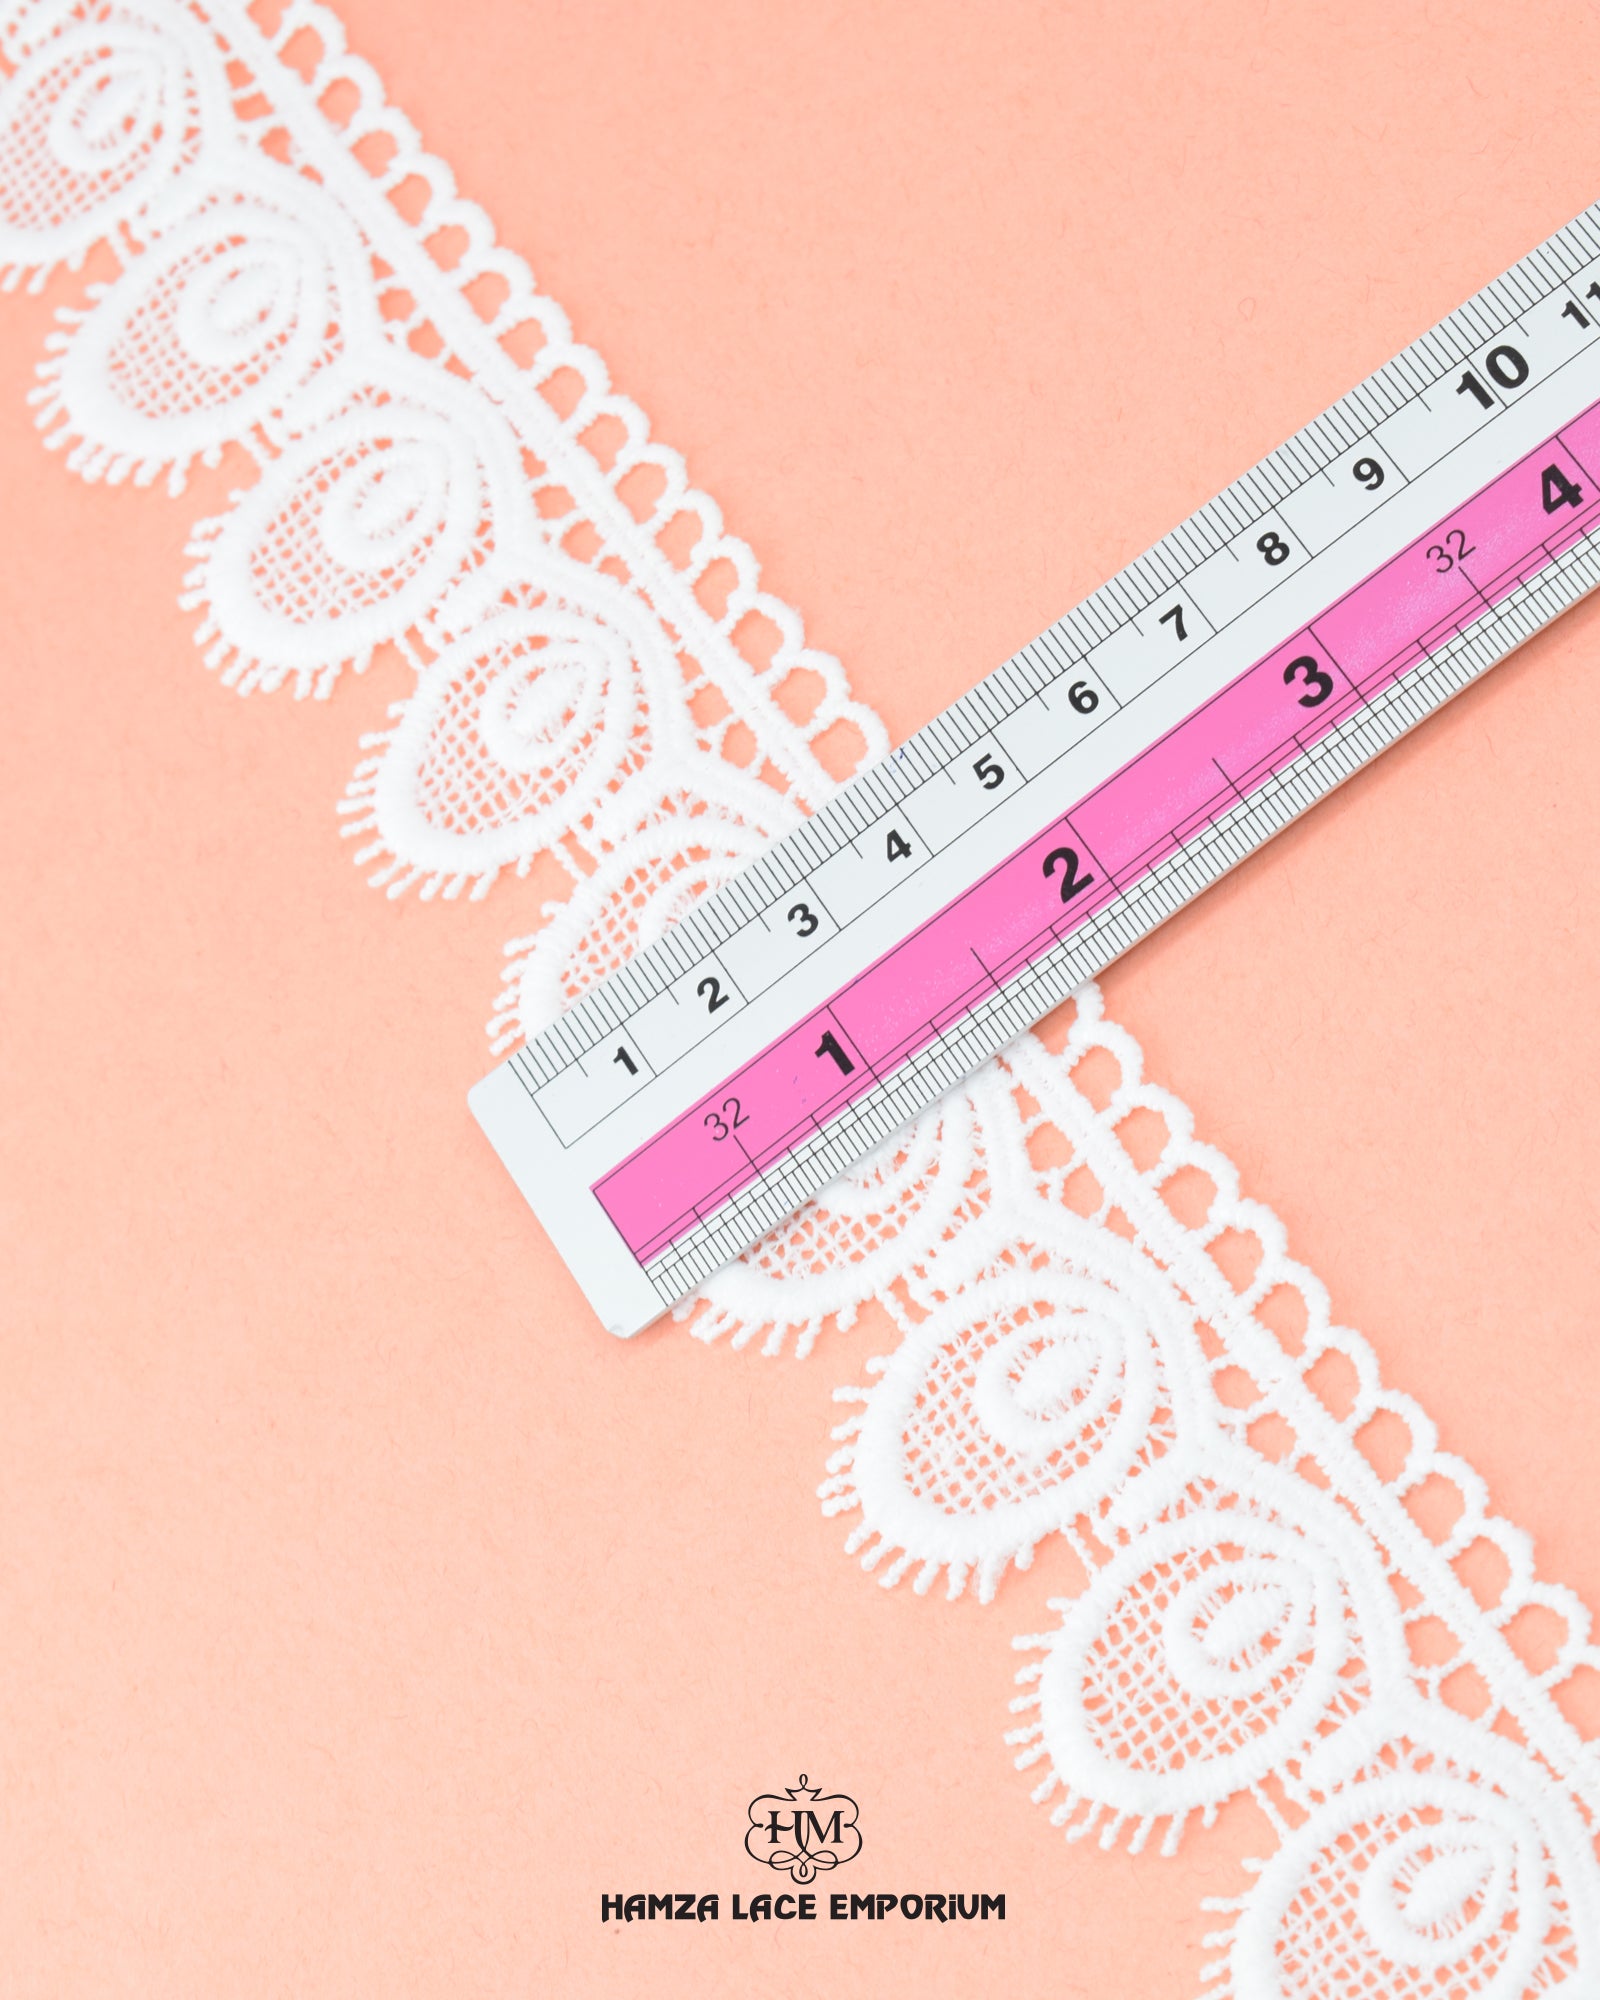 Size of the 'Edging Loop Lace 23336' is shown as '2' inches with the help of a ruler